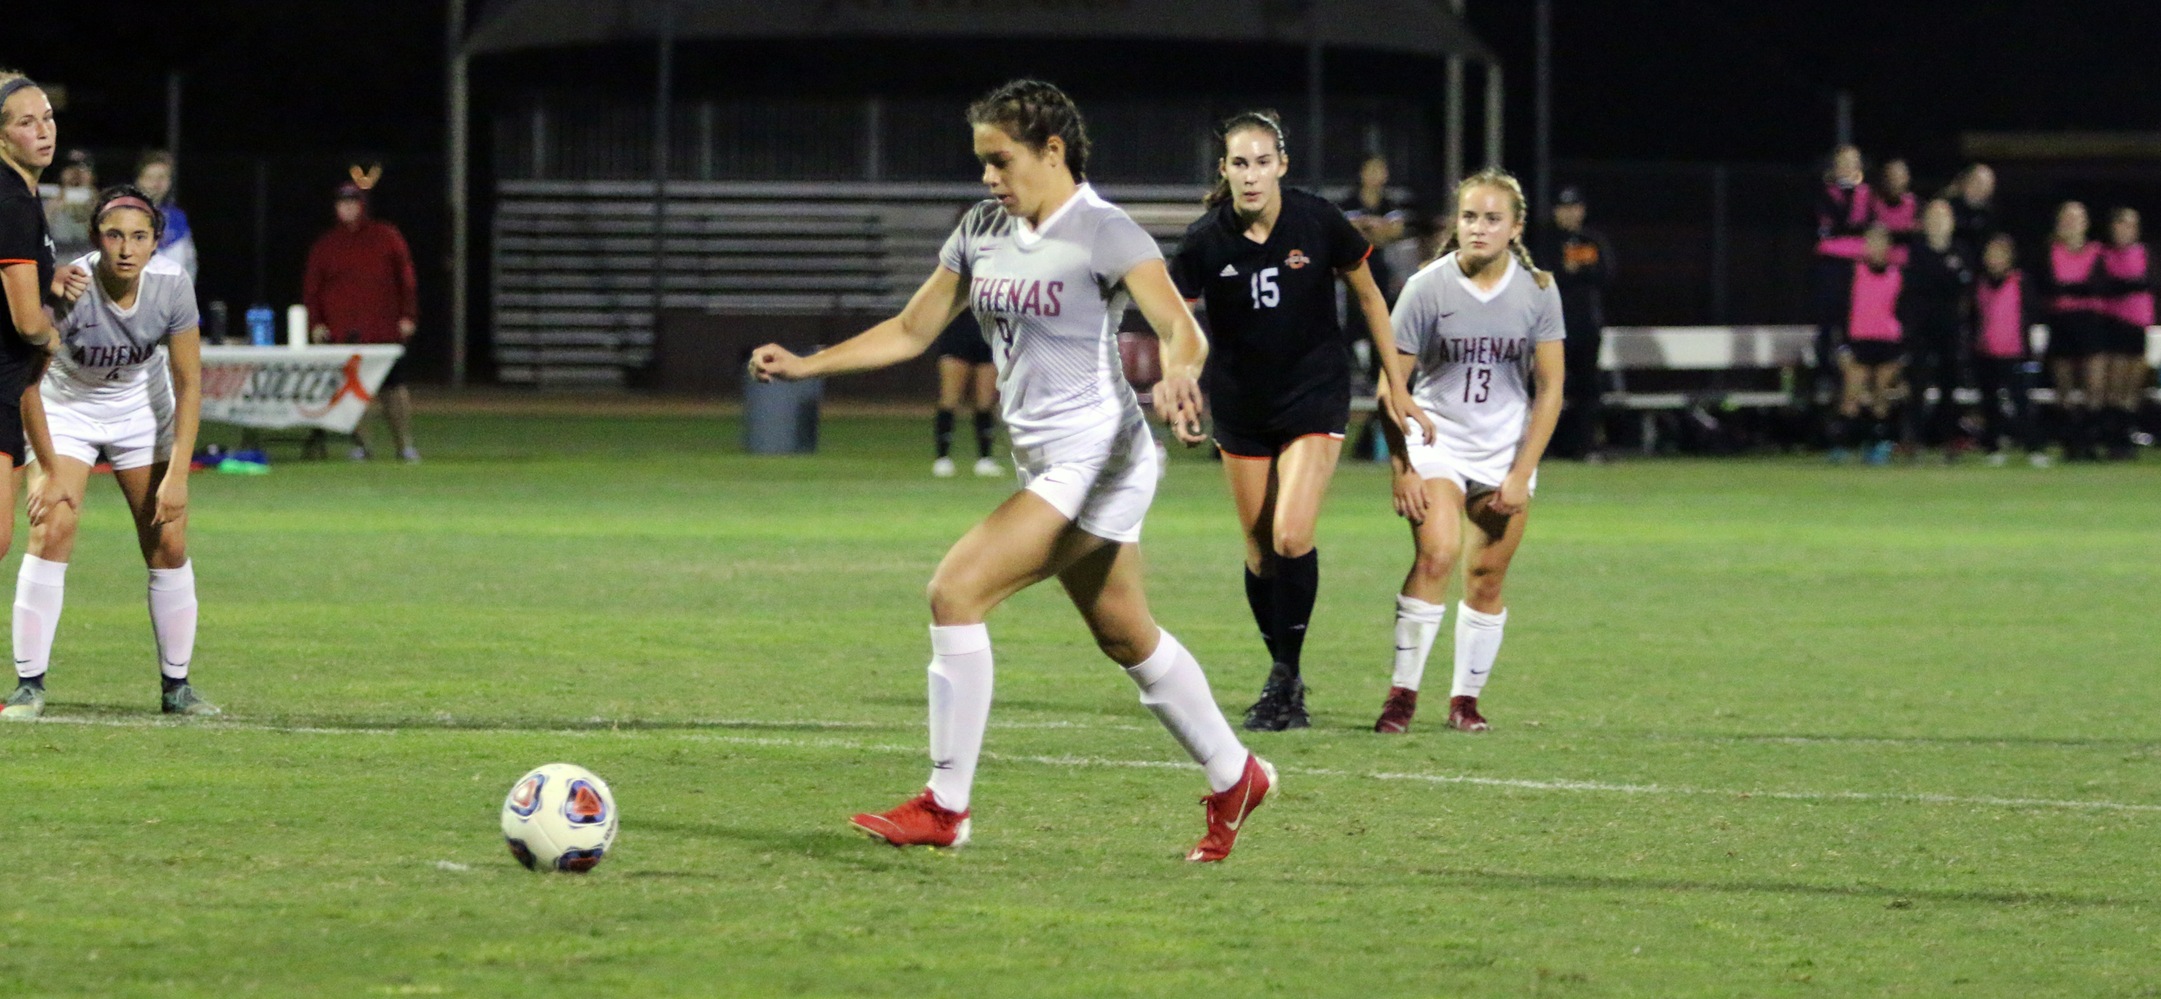 Kira Favakeh approaches her penalty kick for the CMS goal in its game against Occidental (photo by Hannah Graves)